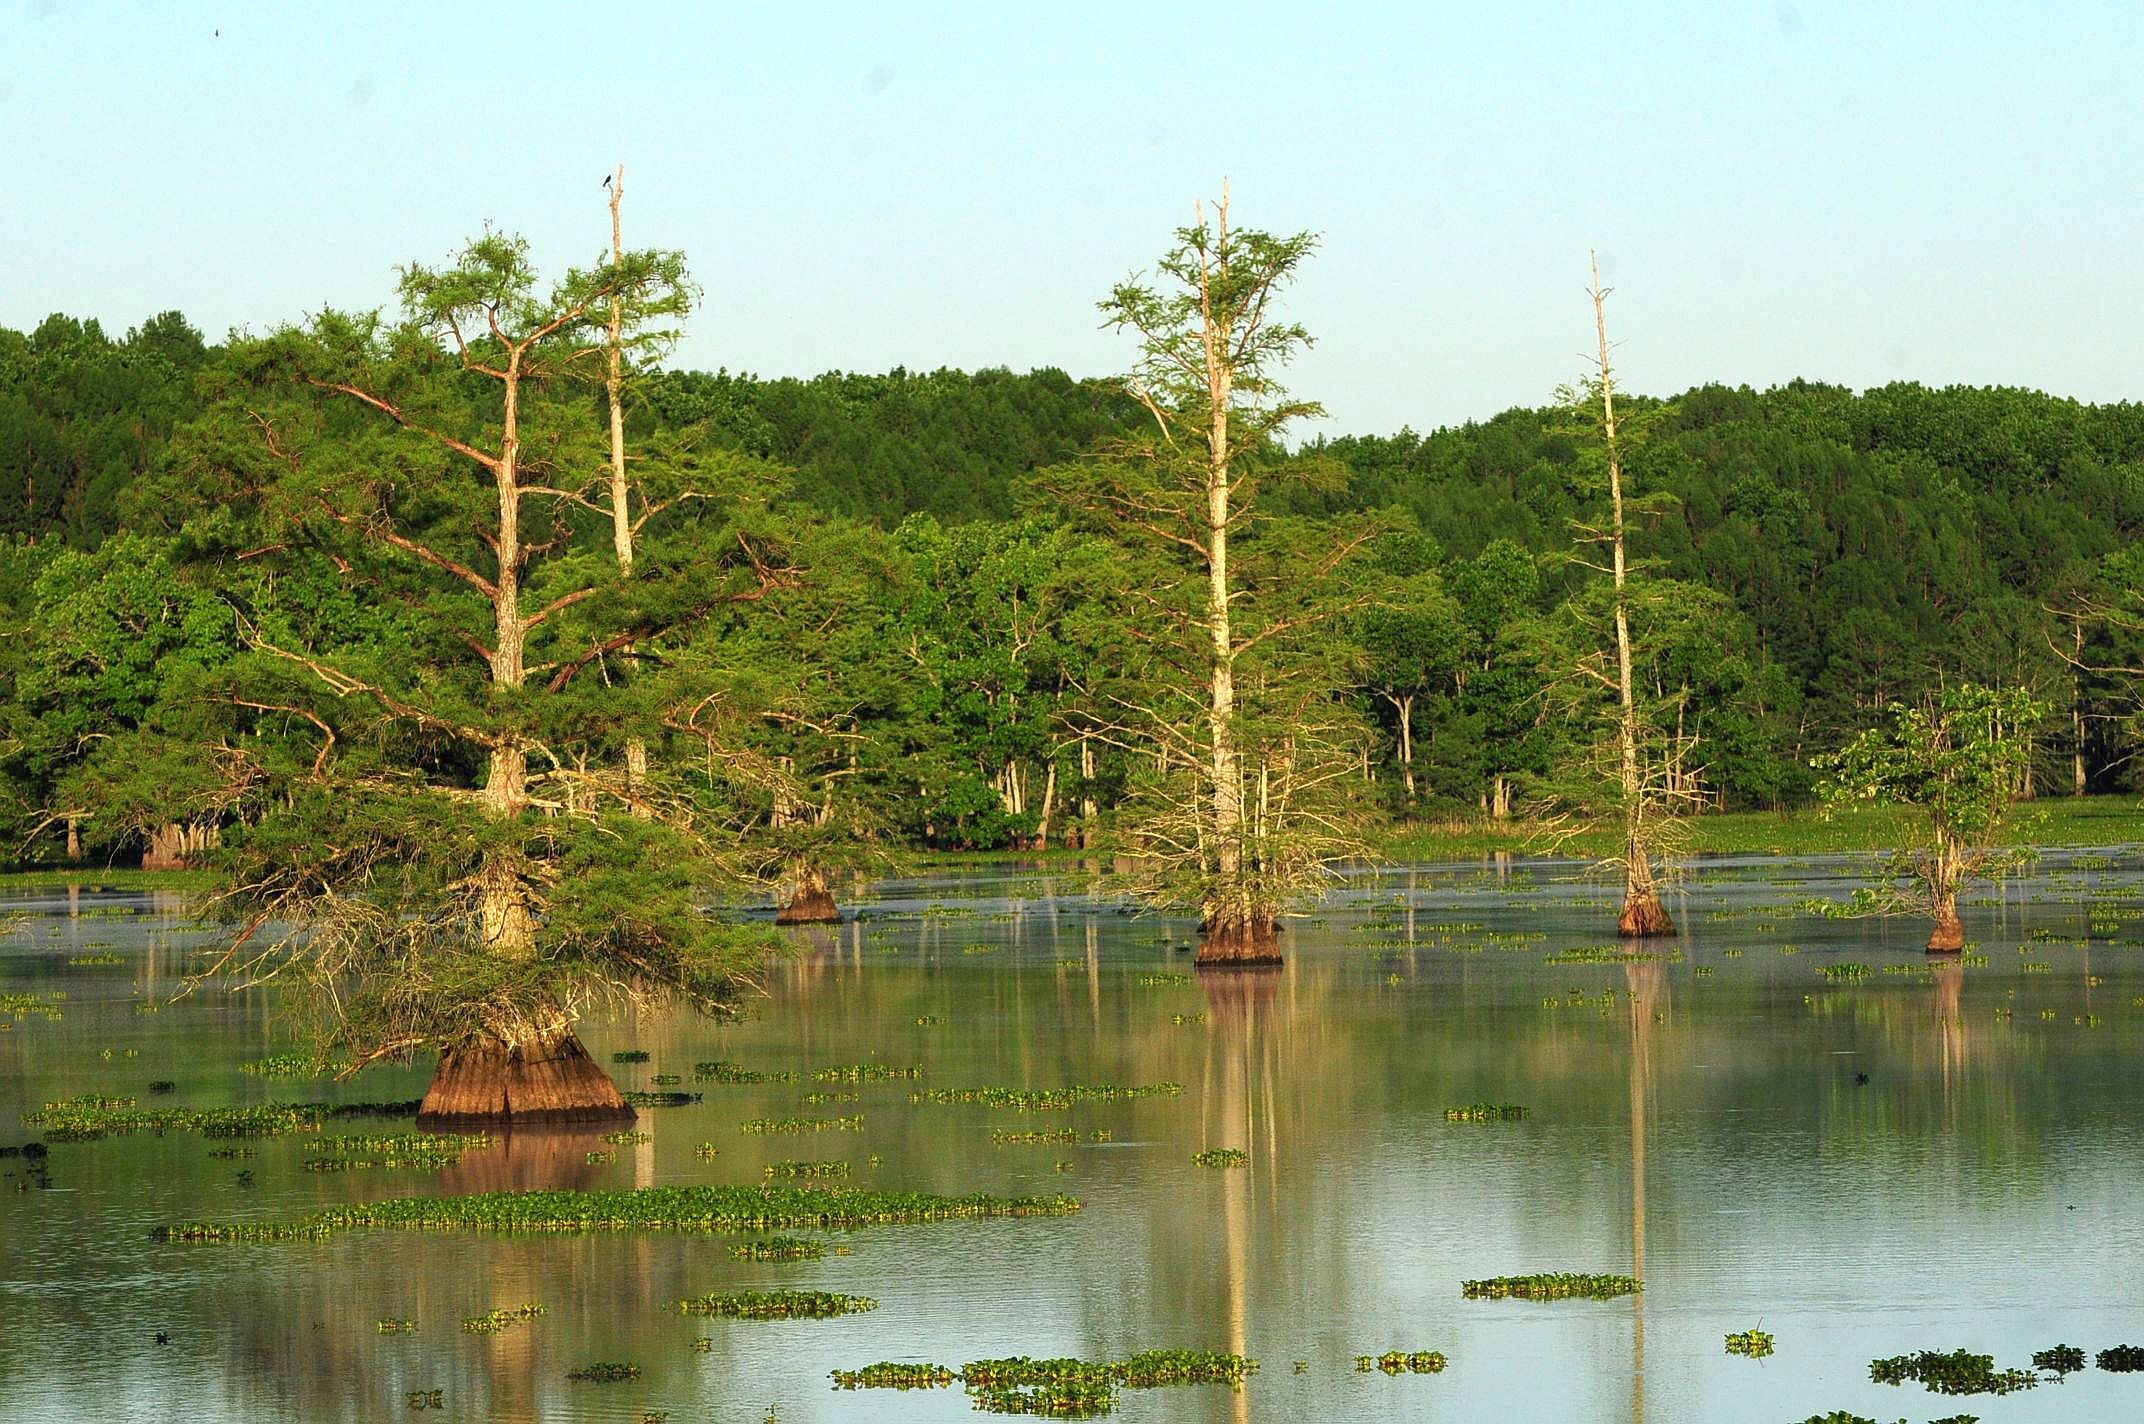 A wetland with bald cypress trees in it and forest alongside it